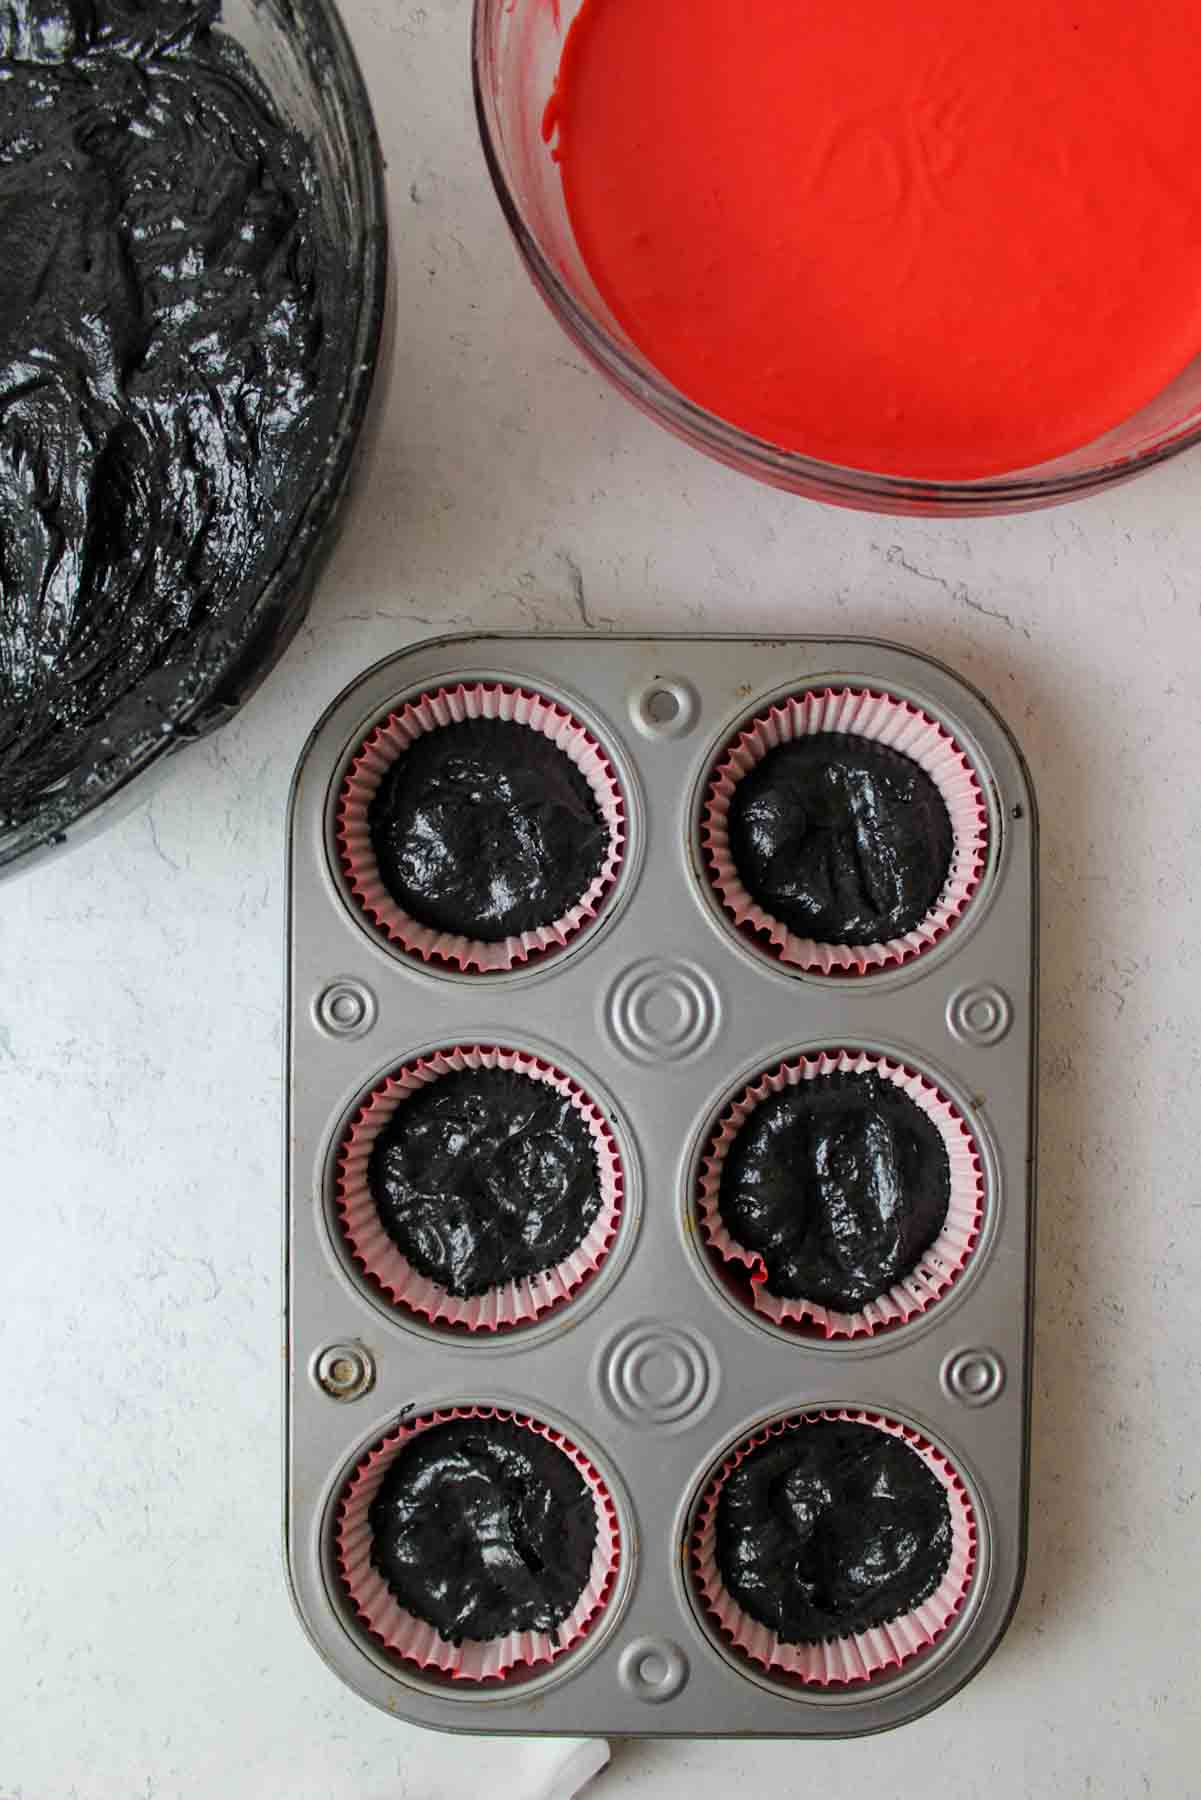 black cupcake batter in bottom of lined muffin tin